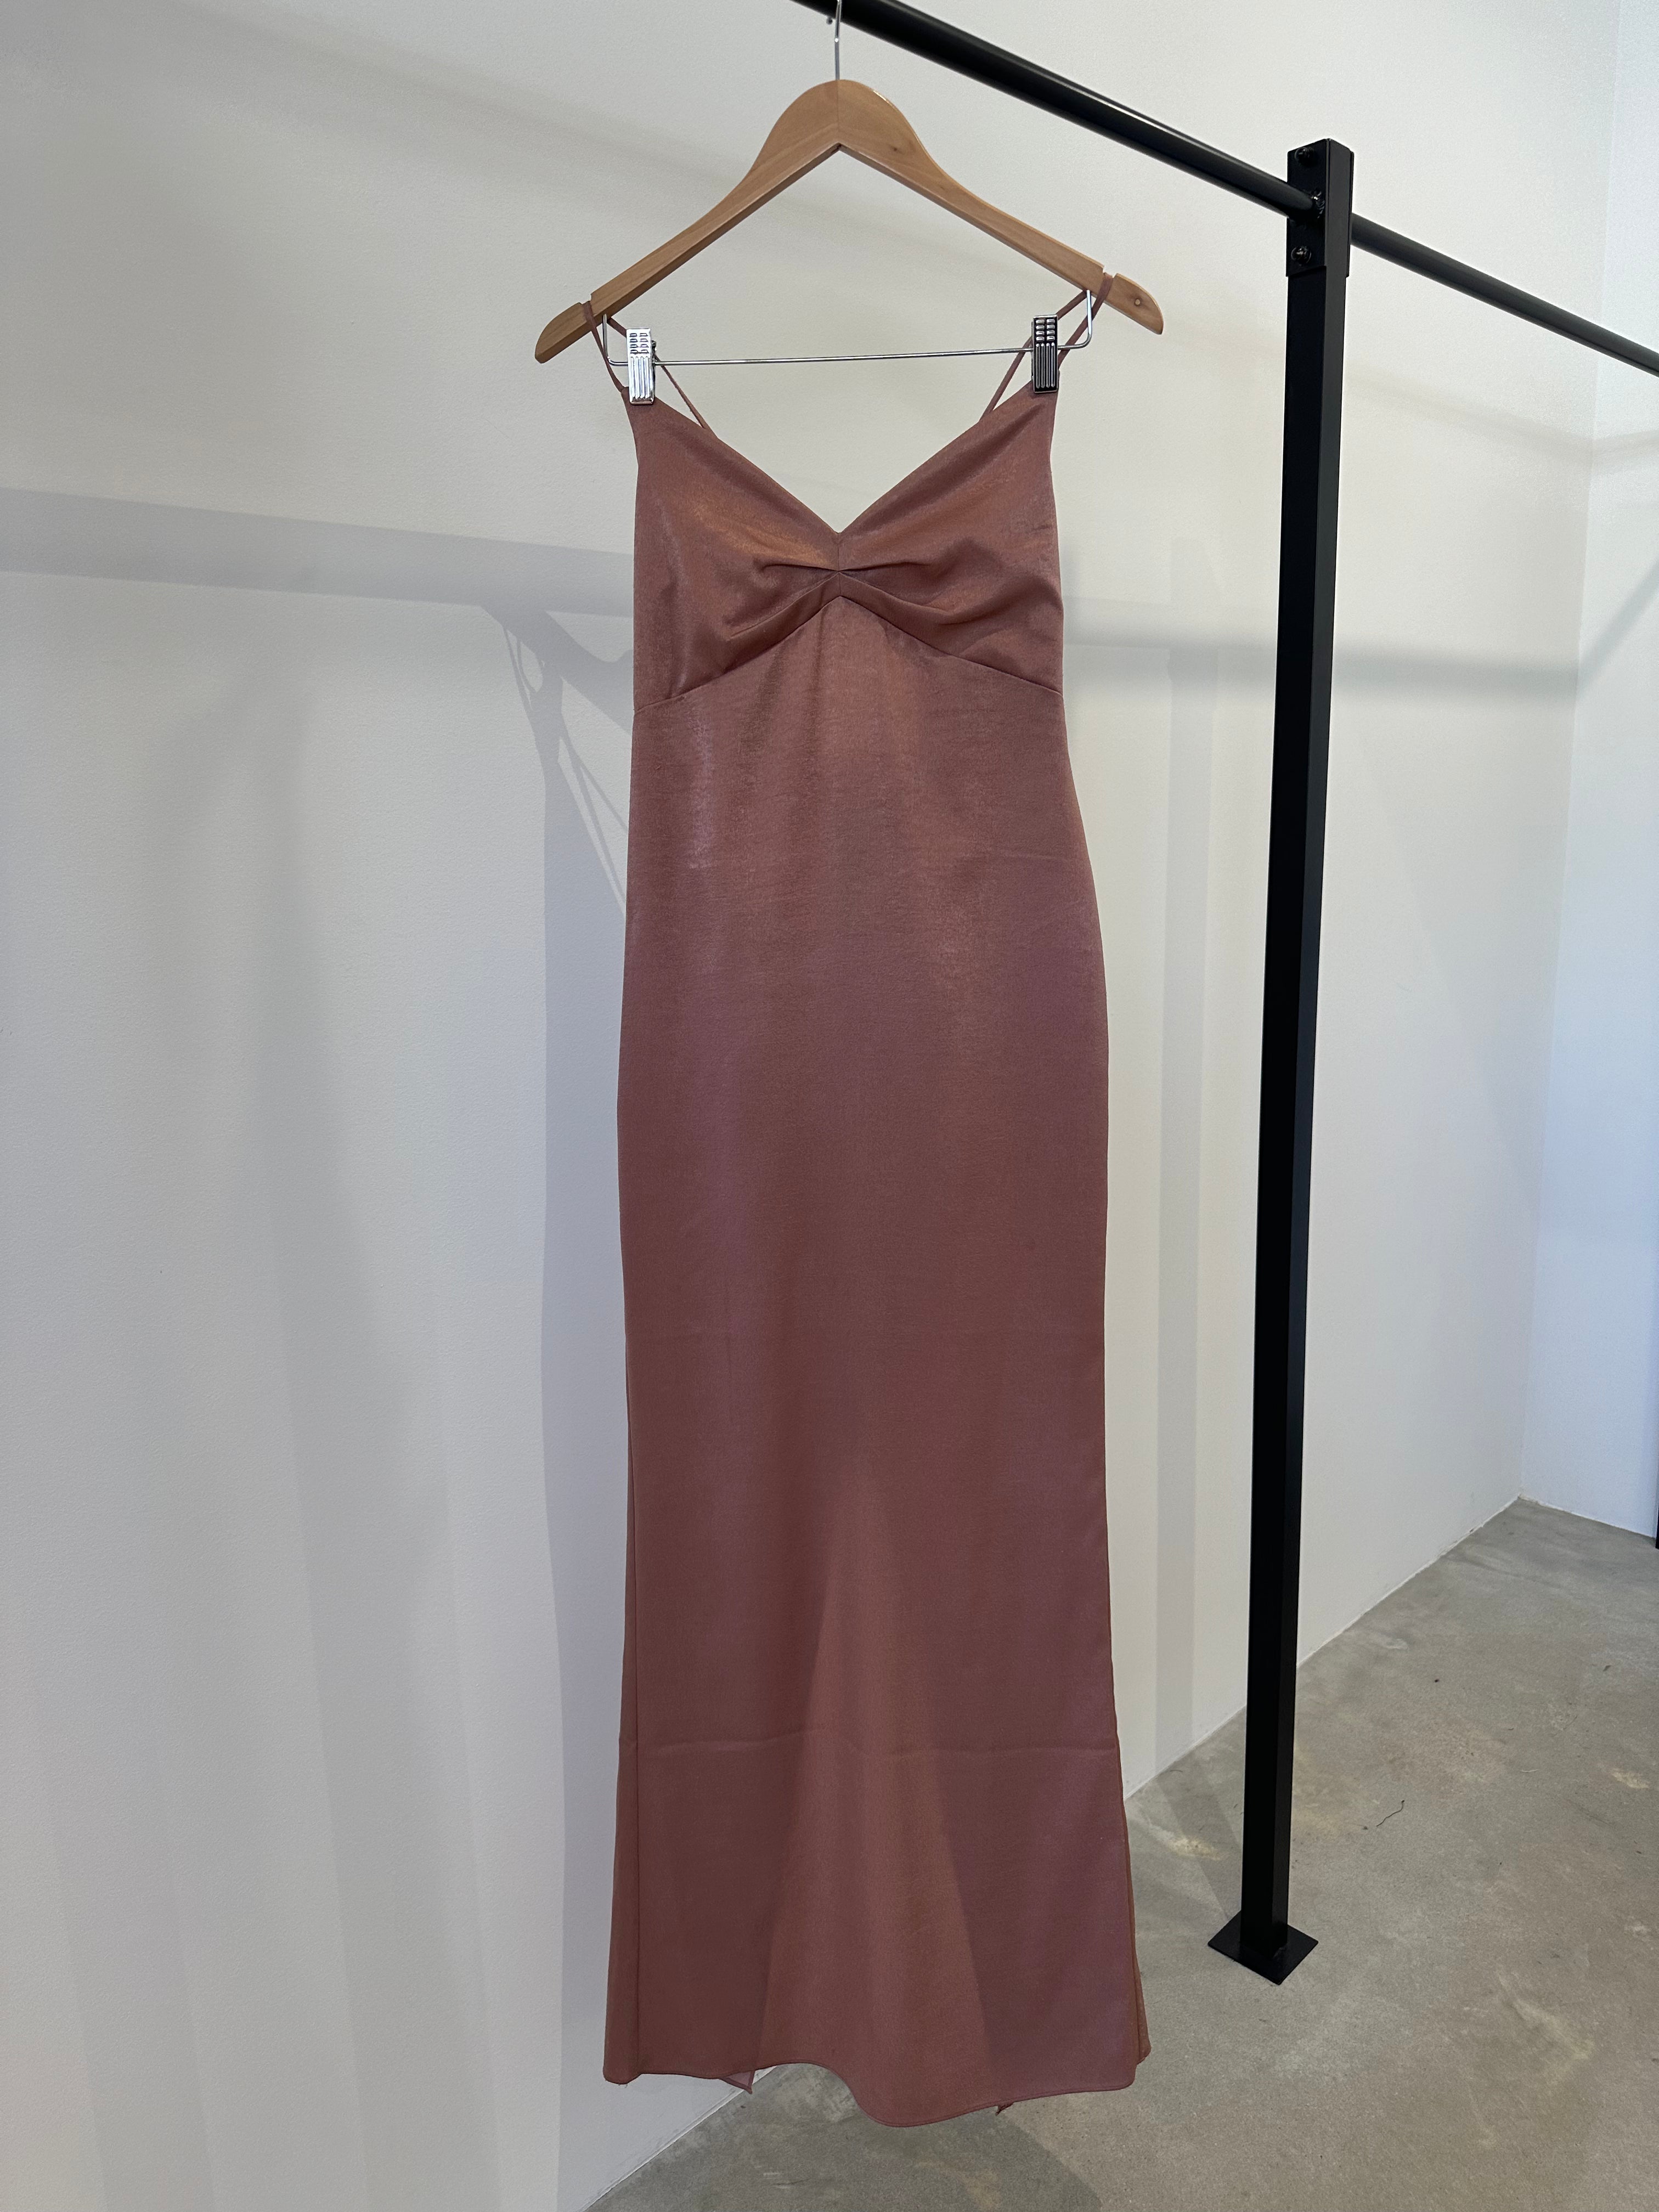 Ellie Gown - FOR SALE